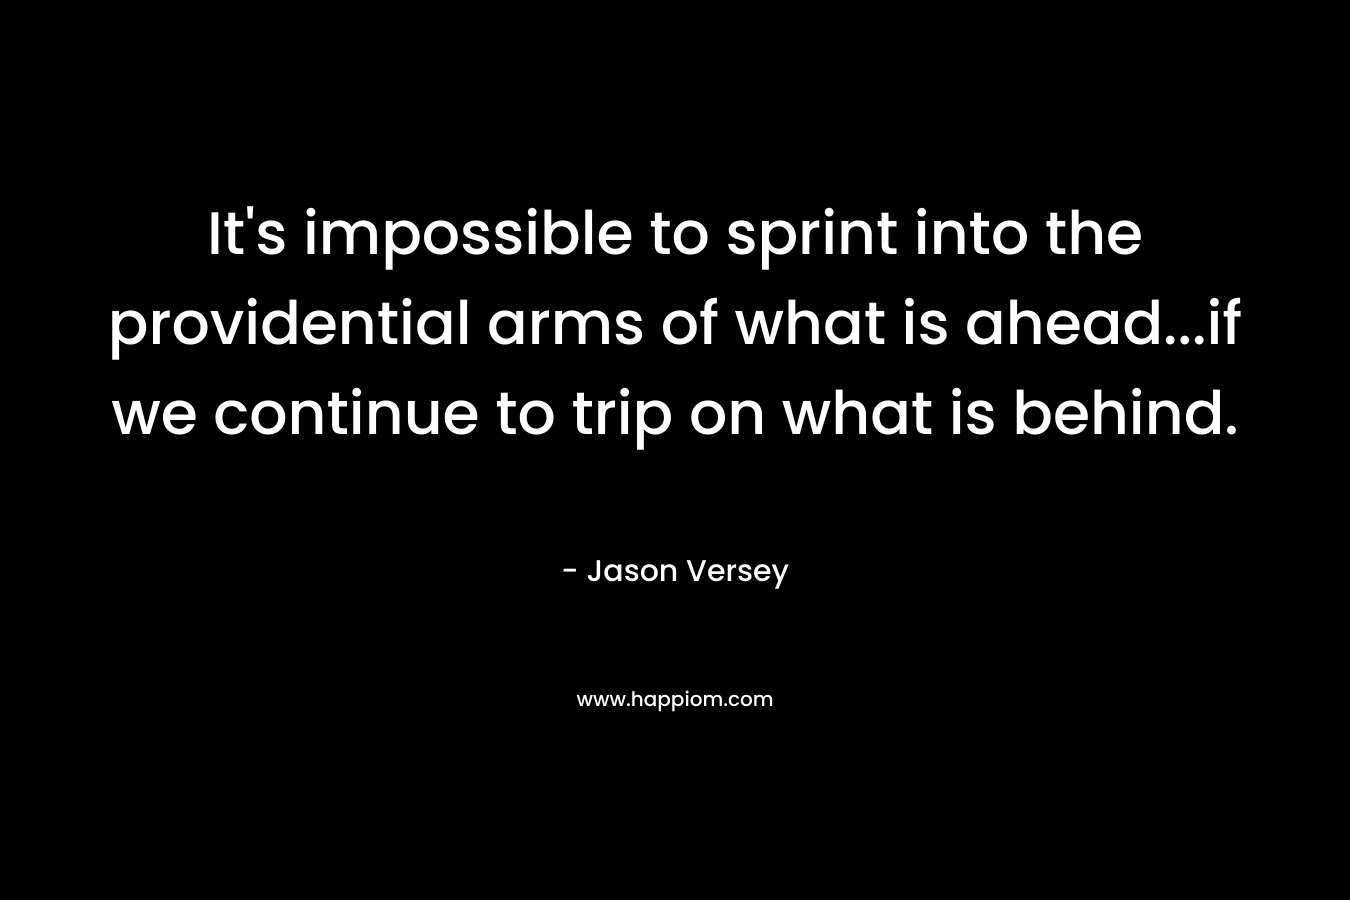 It’s impossible to sprint into the providential arms of what is ahead…if we continue to trip on what is behind. – Jason Versey